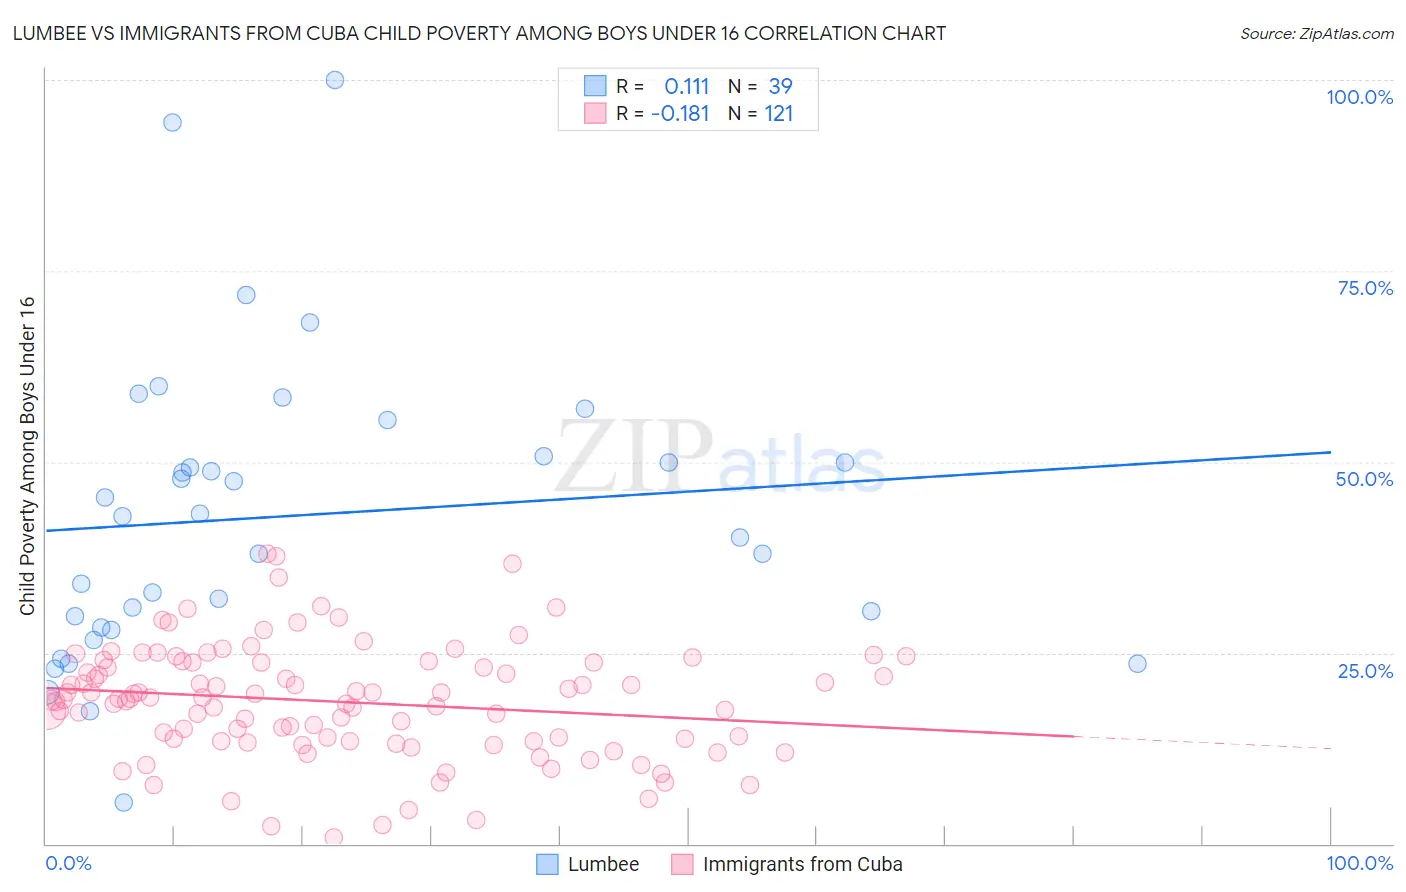 Lumbee vs Immigrants from Cuba Child Poverty Among Boys Under 16